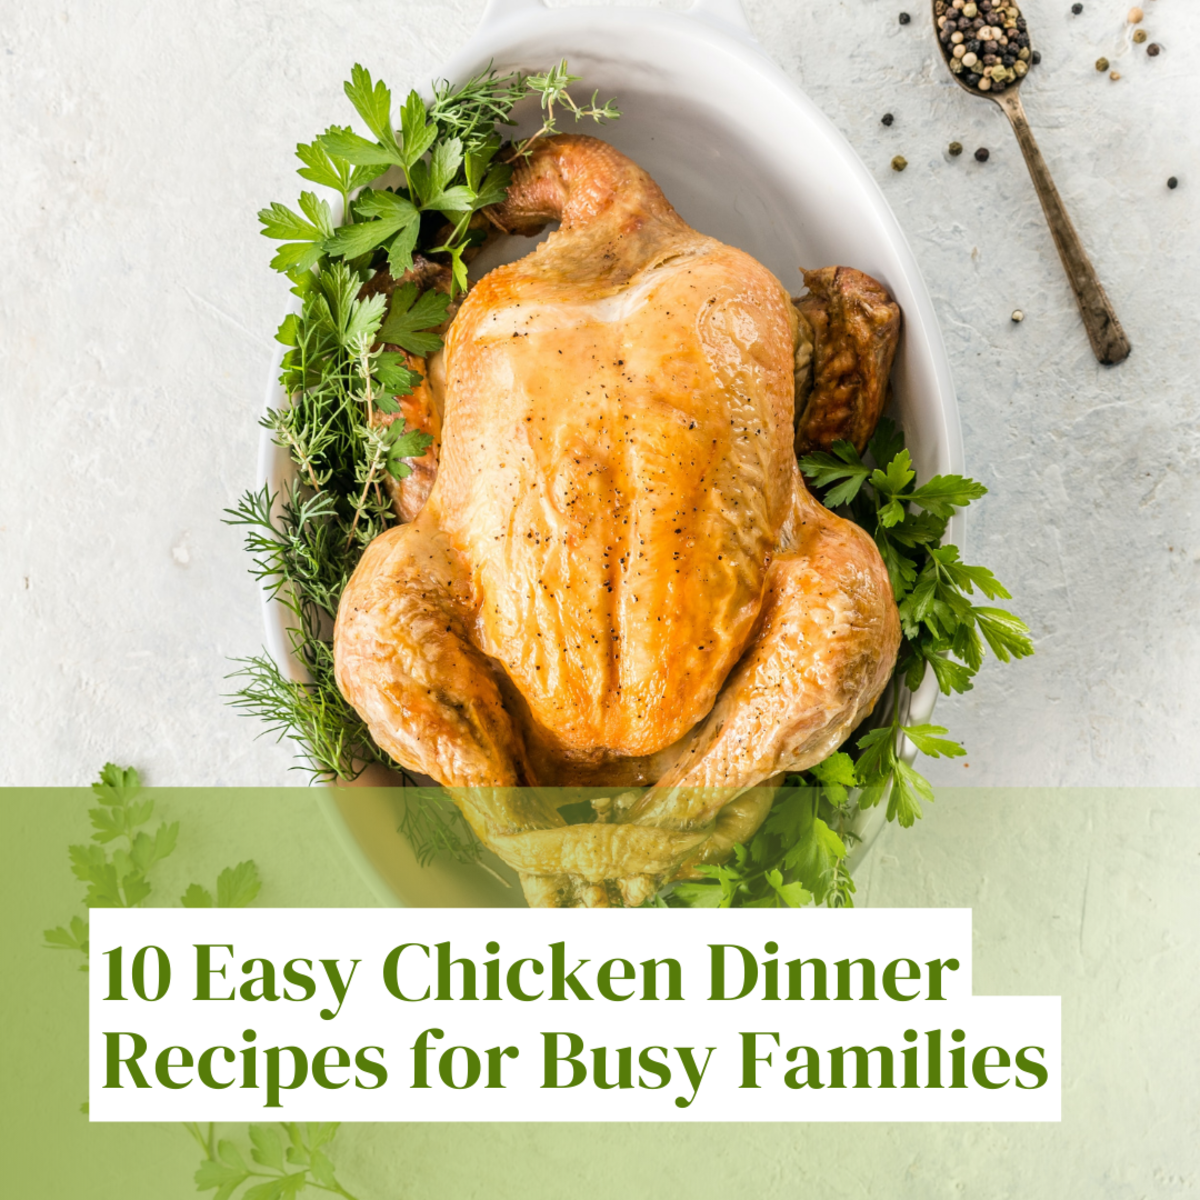 10 Easy Chicken Dinner Recipes for Busy Families